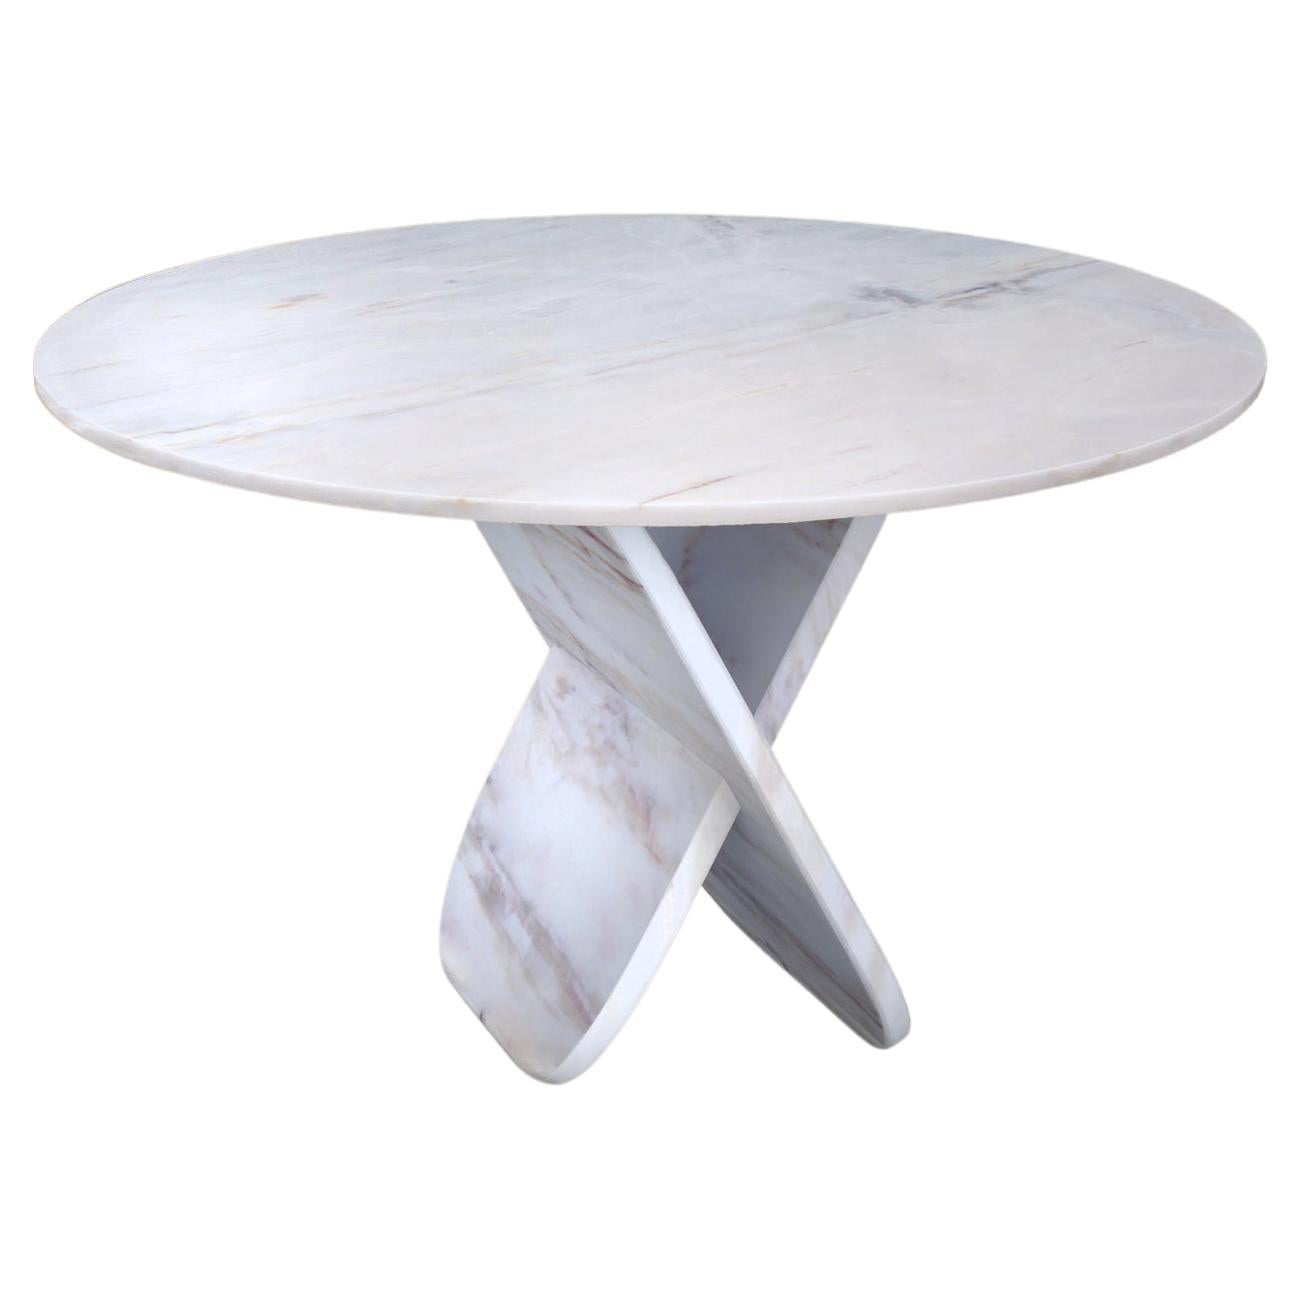 Balance Contemporary Marble Dining Round Table by Dovain Studio & Sergio Prieto For Sale